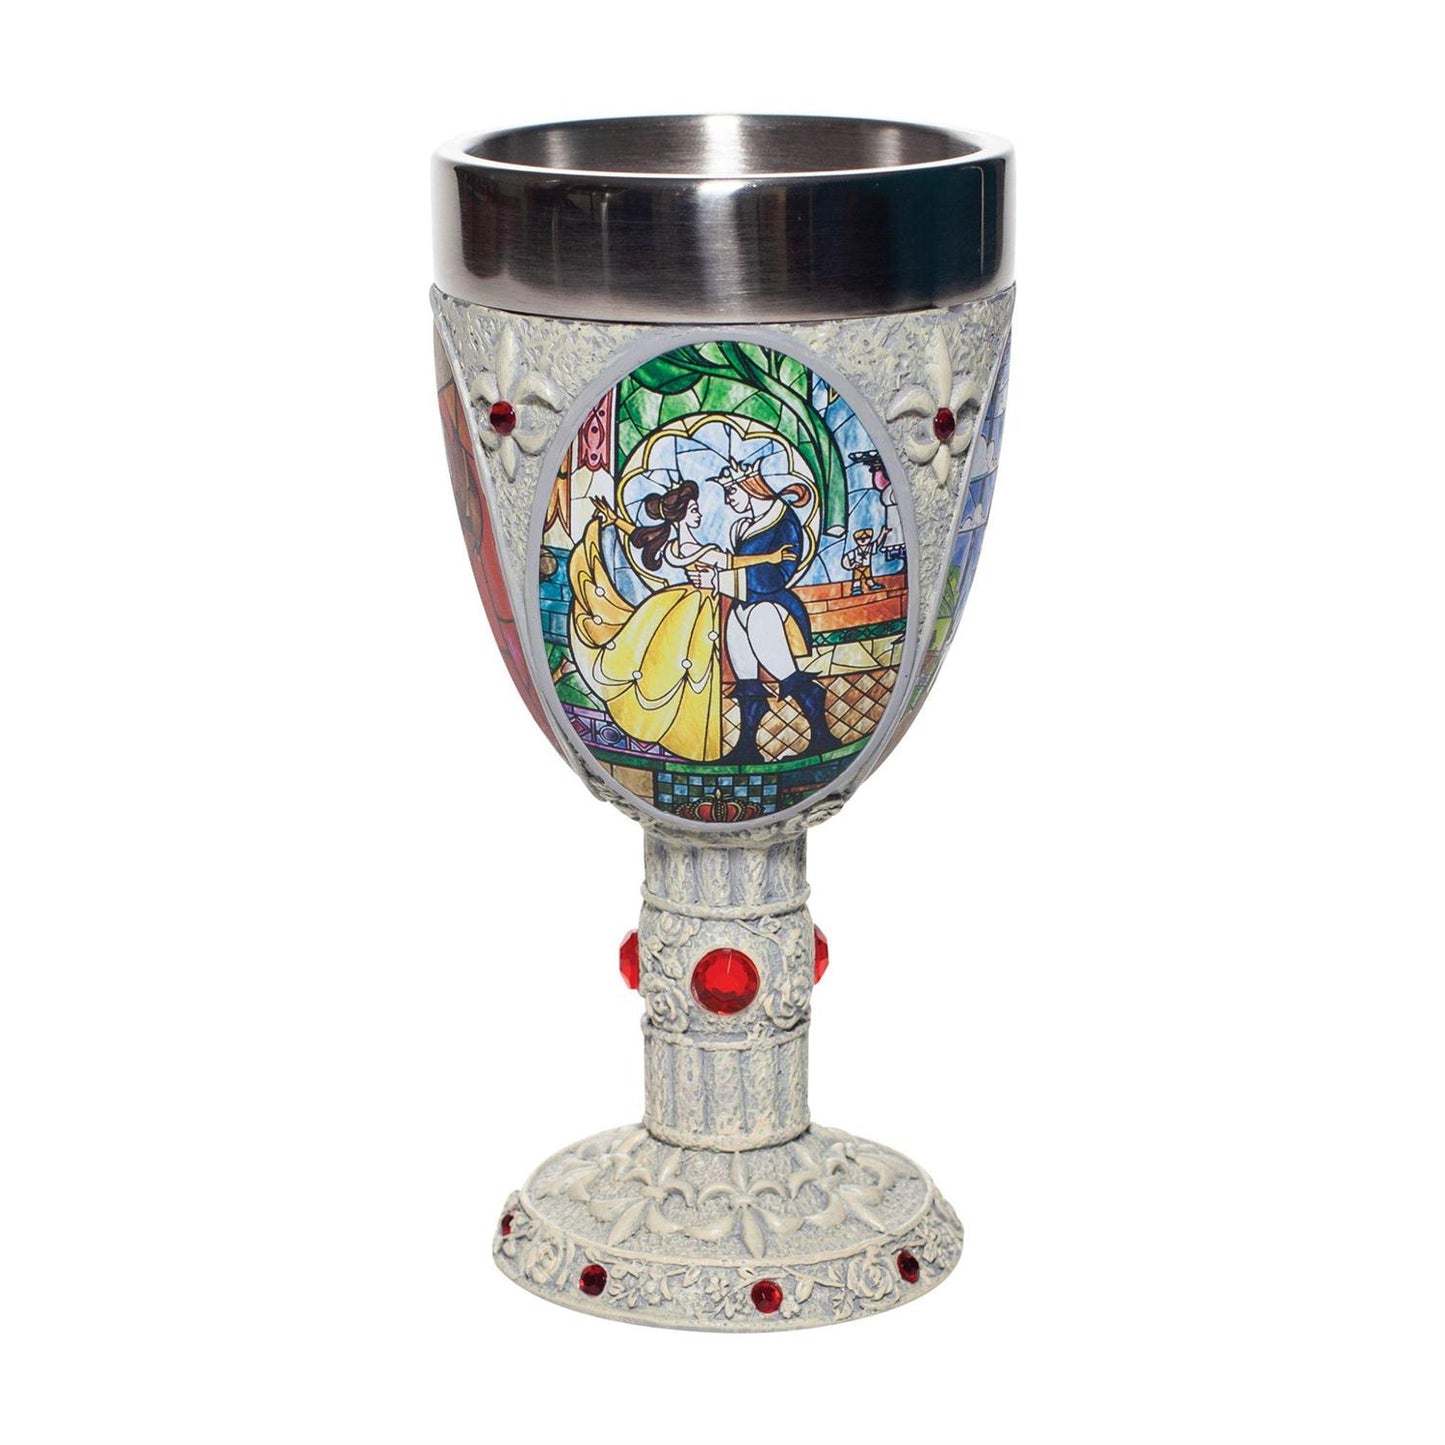 Disney Showcase: Beauty and the Beast Goblet